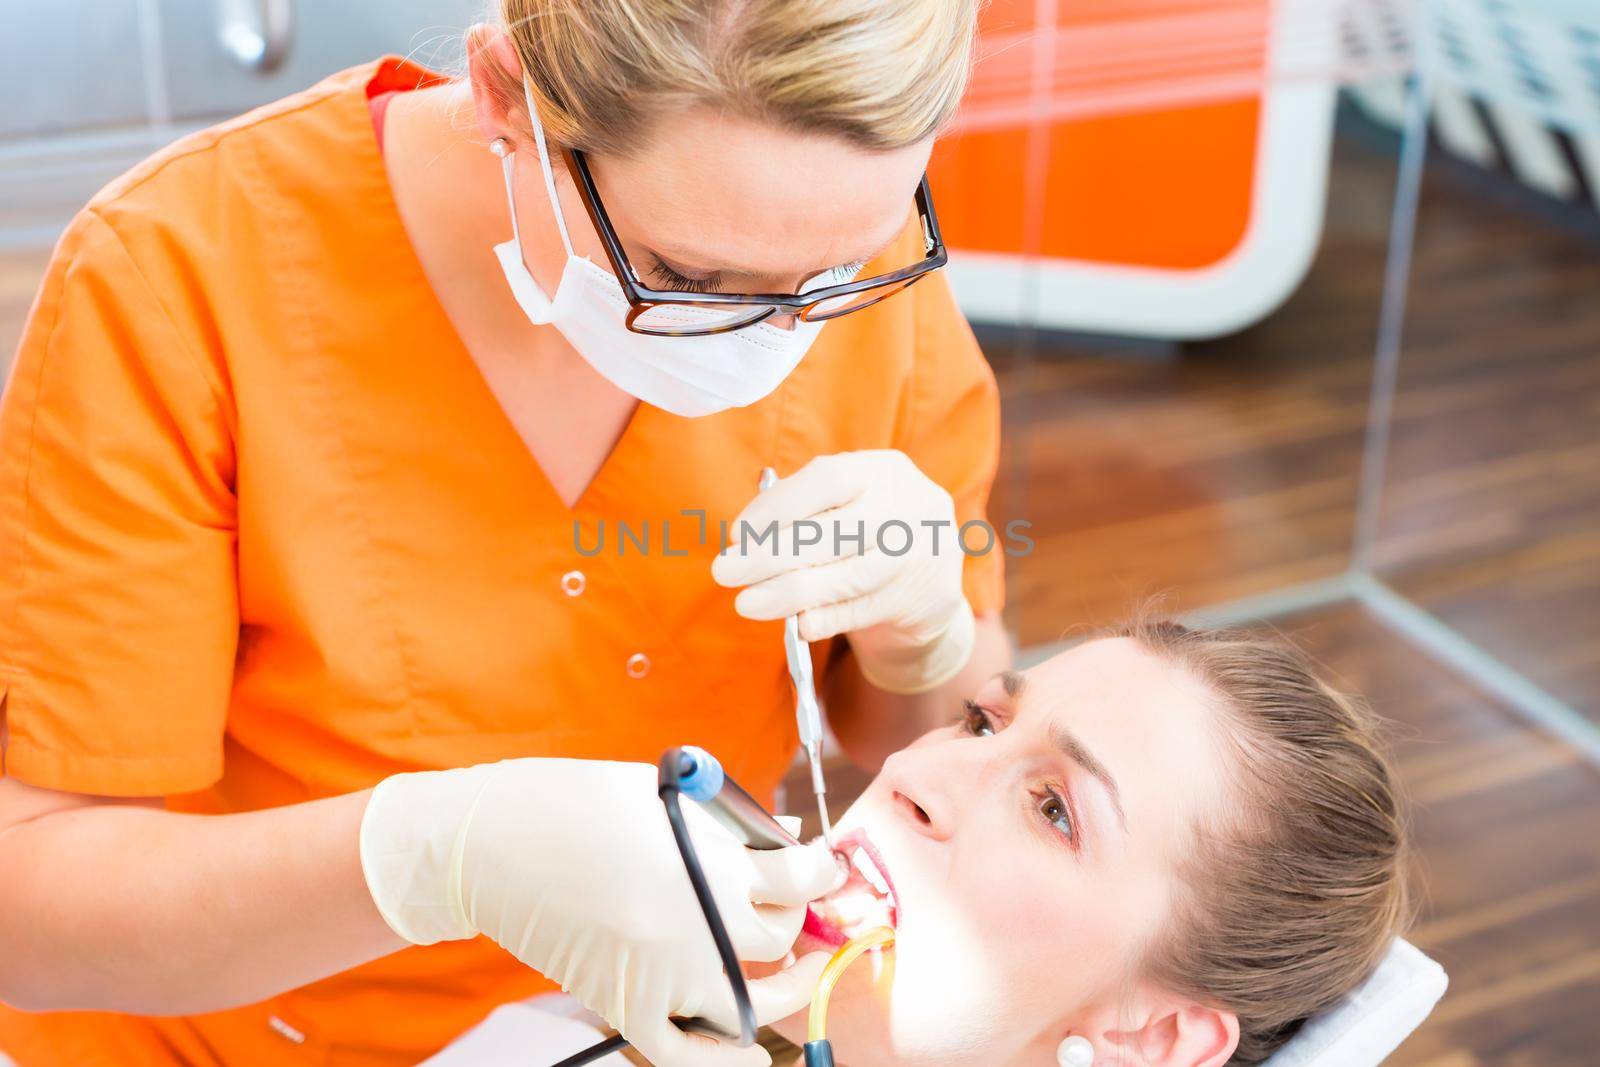 Patient having dental tooth cleaning at dentist by Kzenon